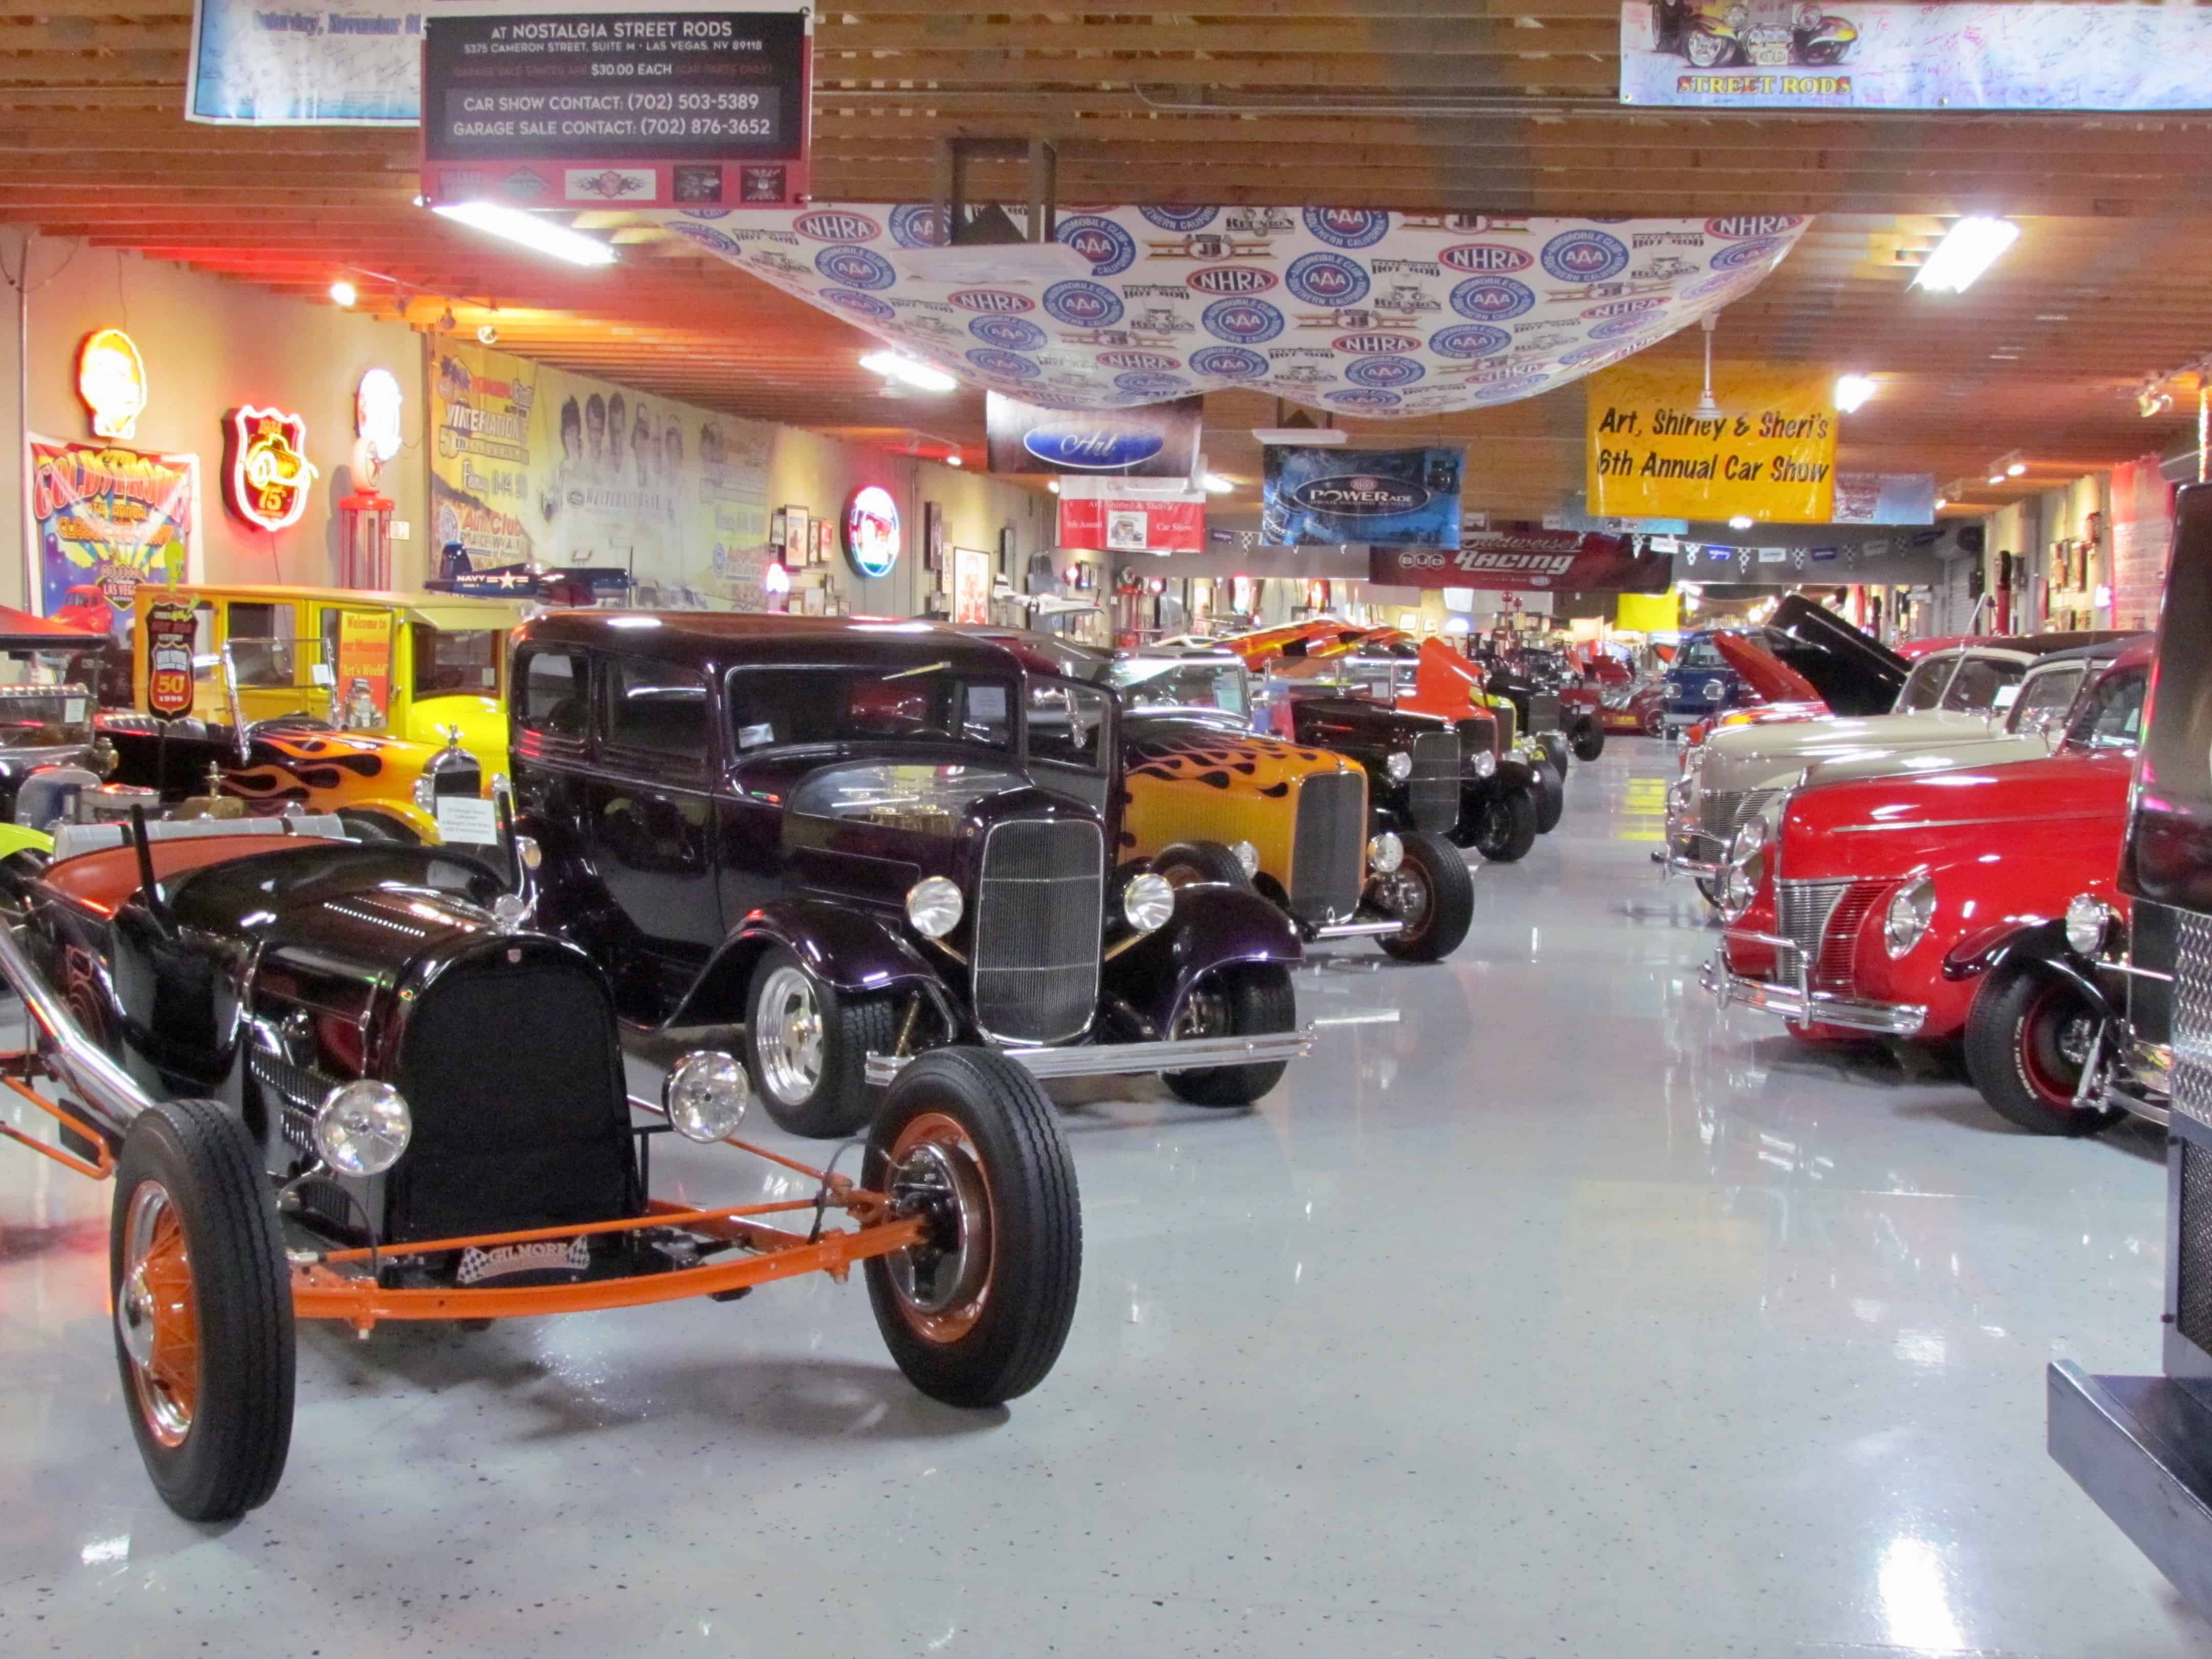 Nostalgia extends well beyond street rods at this museum